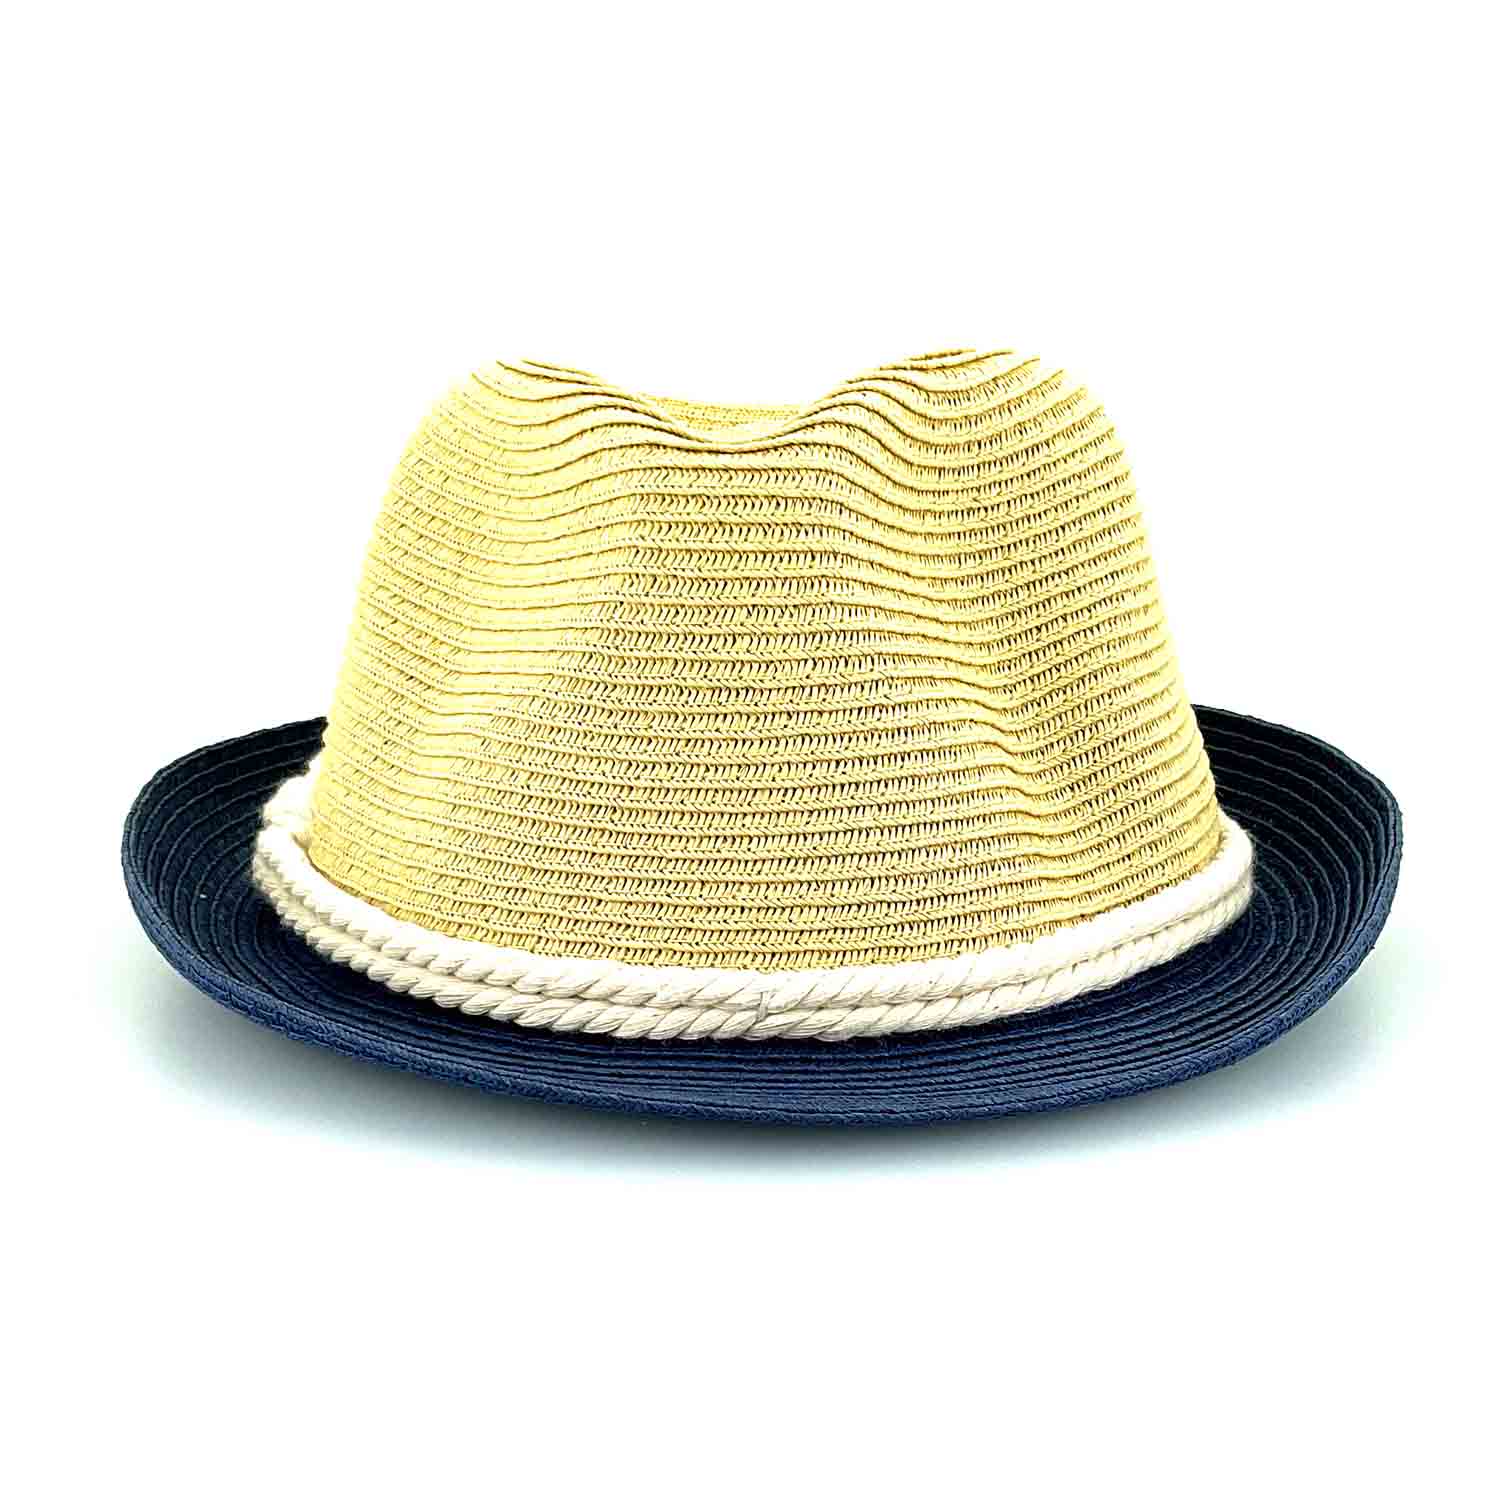 Petite Size Straw Fedora Hat with Rope Tie - Sunny Dayz™ Fedora Hat Sun N Sand Hats    